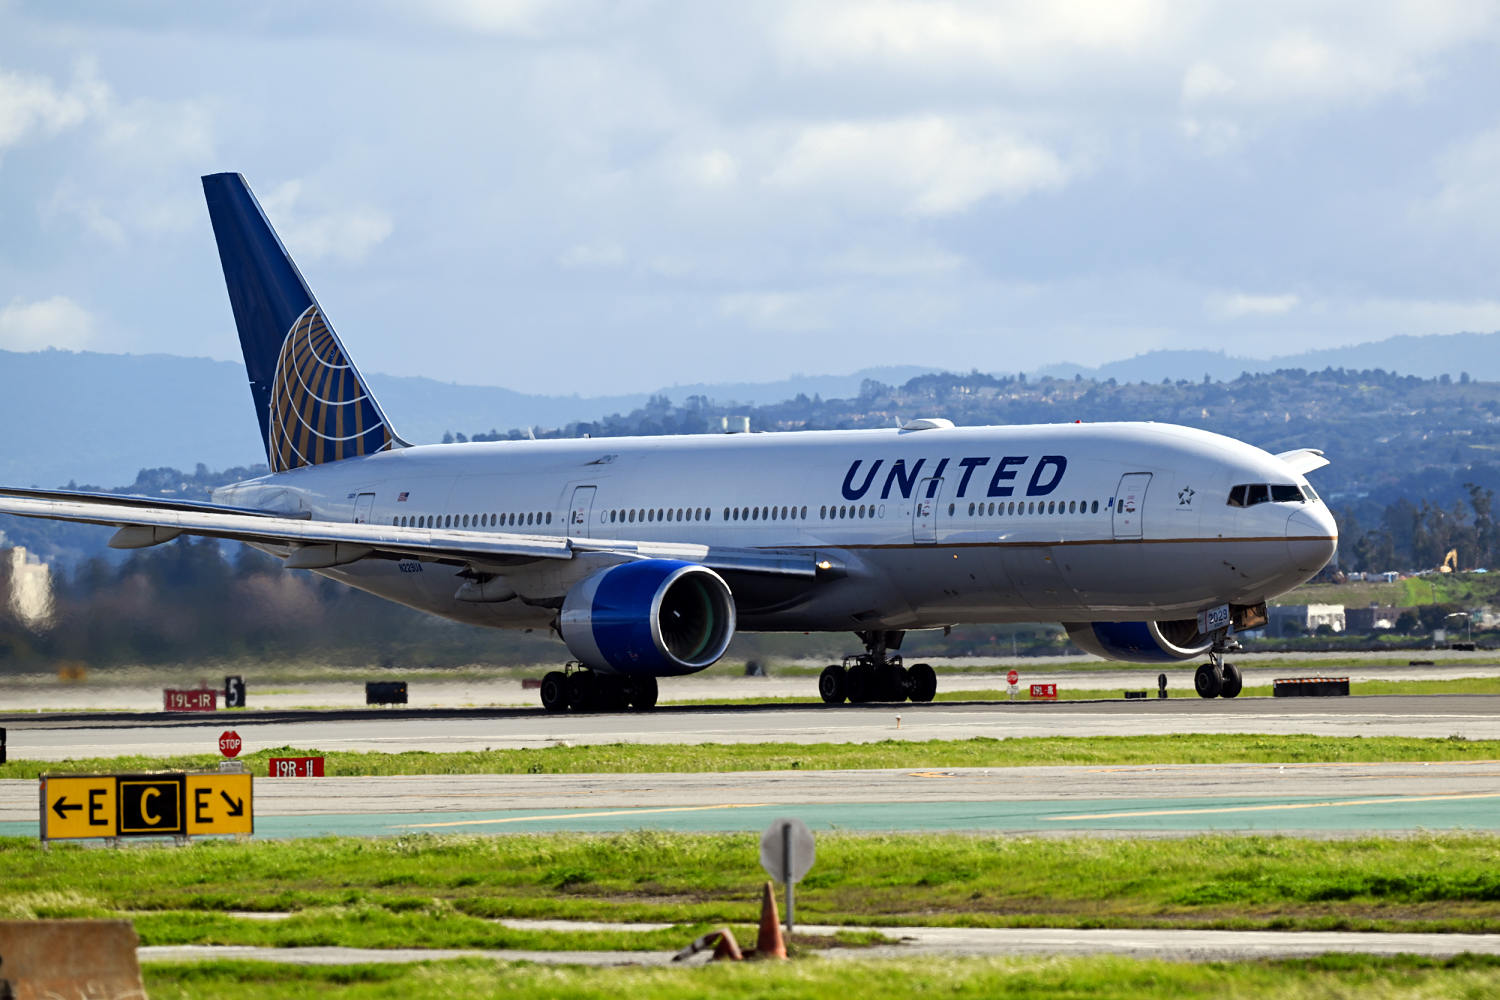 Passenger video shows flames shoot out of United Airlines engine midflight 